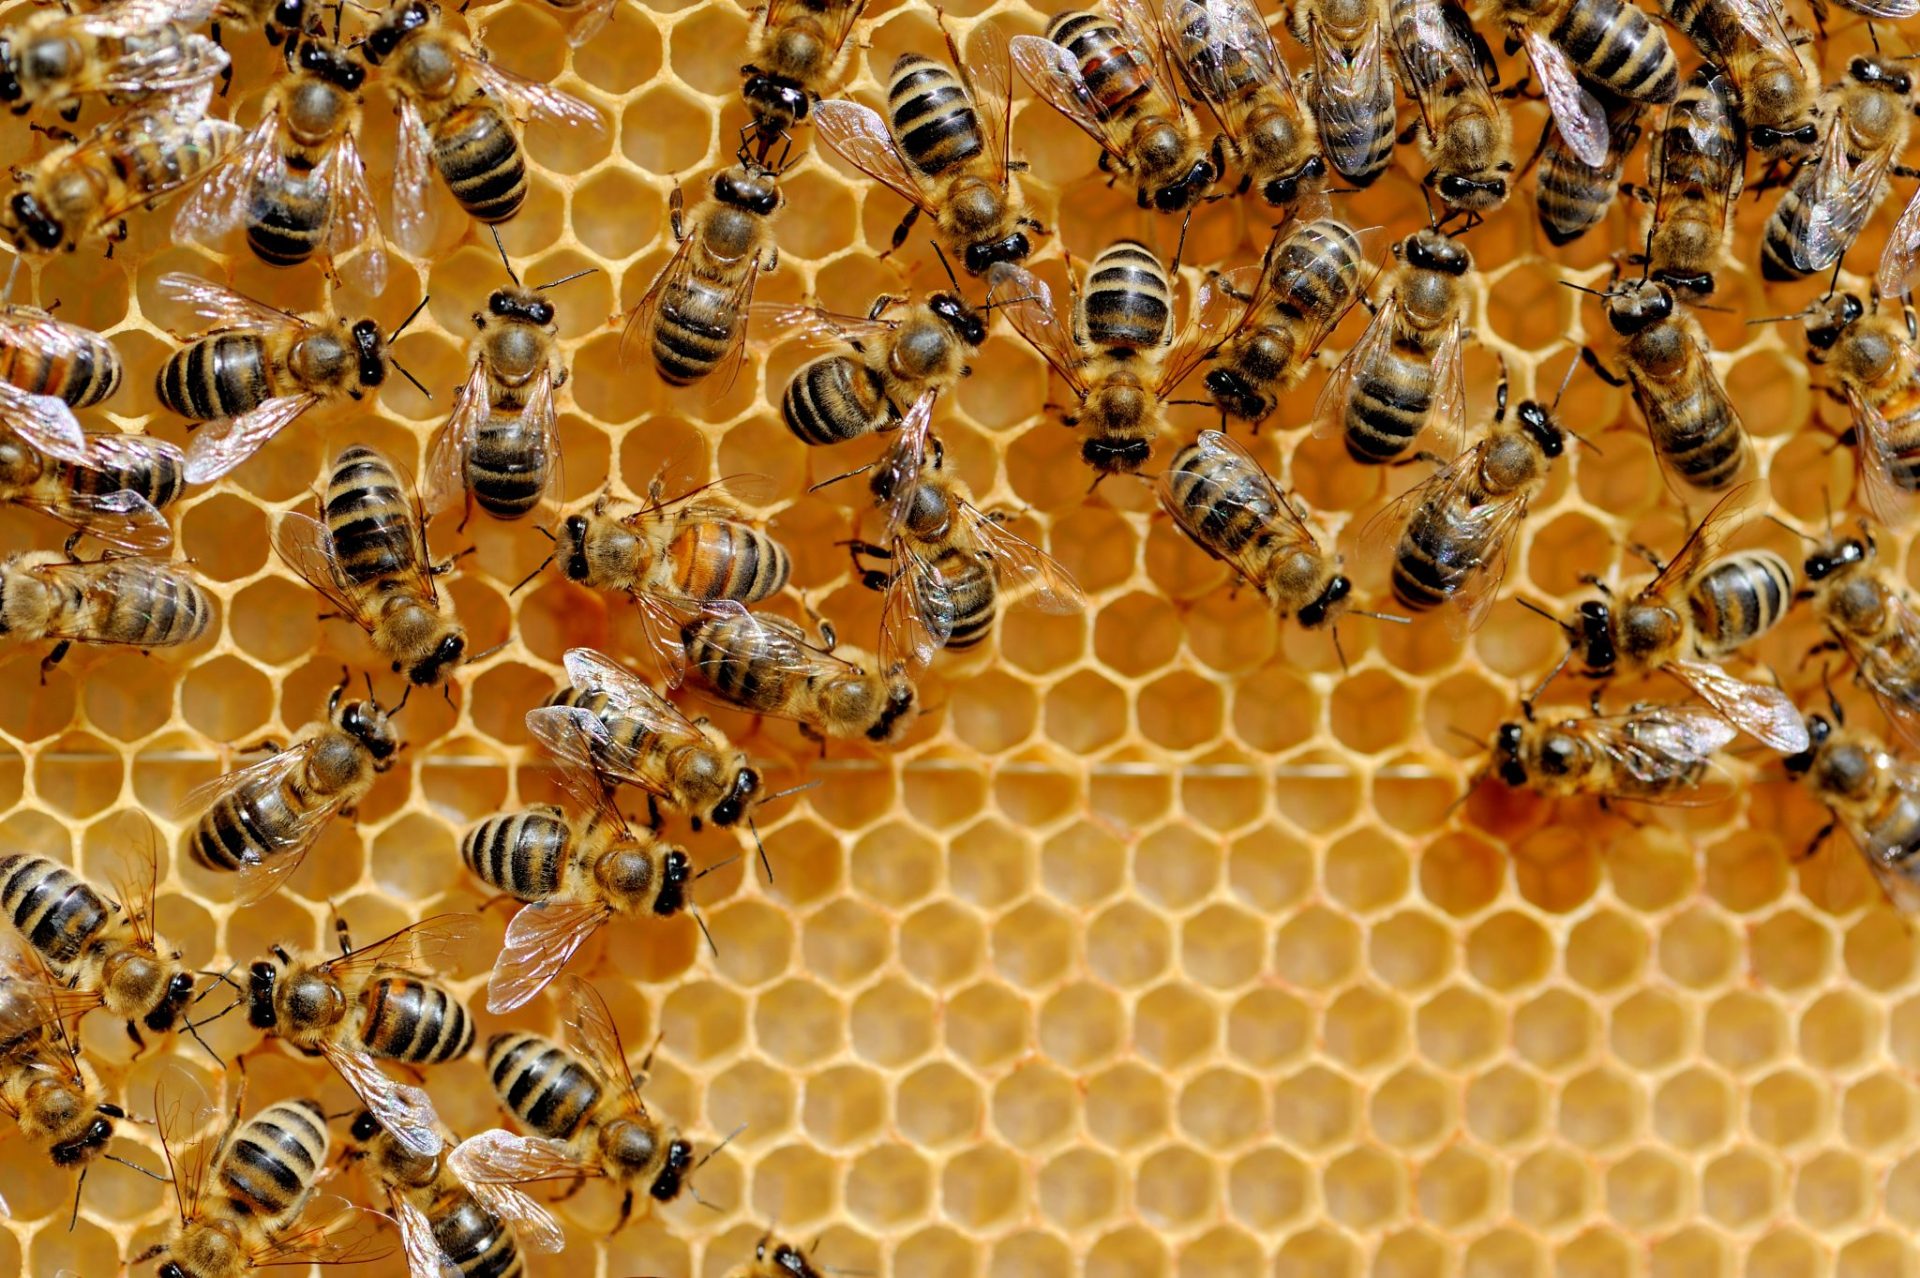 Honey Bee Life Cycle - Worker Bees